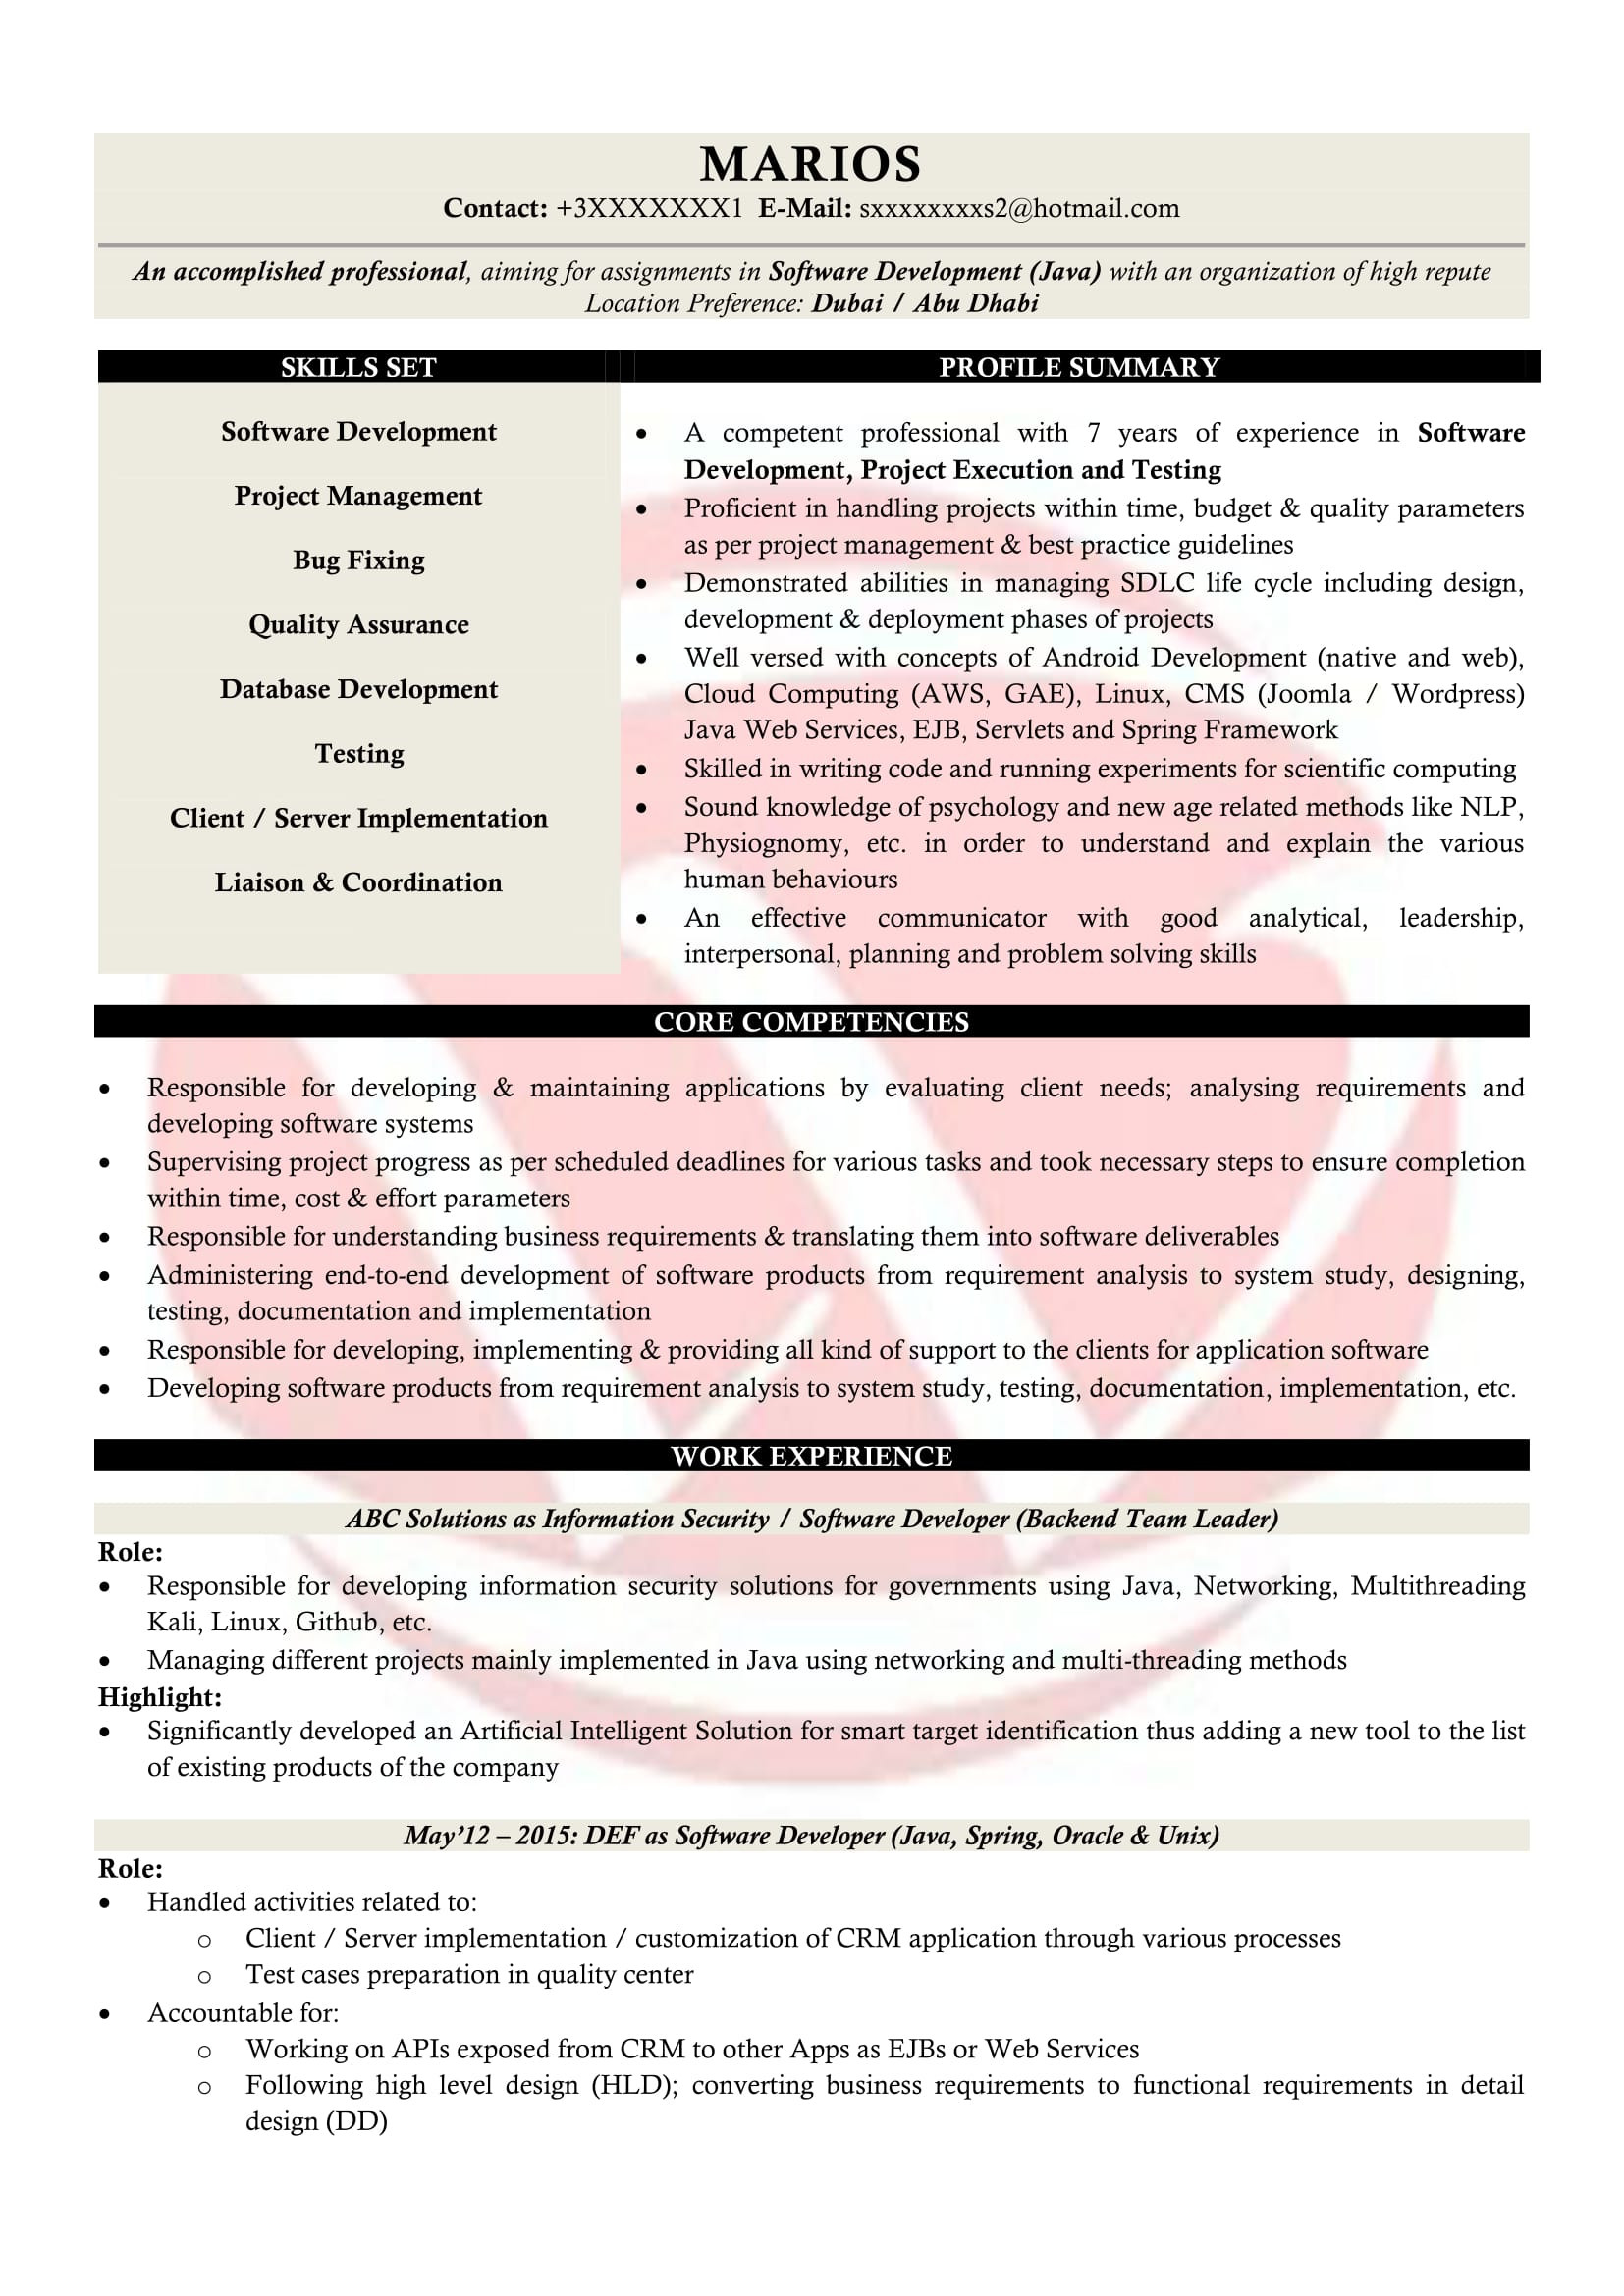 Sample Informatica Fresher Resume formats for 8 Year Experince software Developer Sample Resumes, Download Resume format Templates!